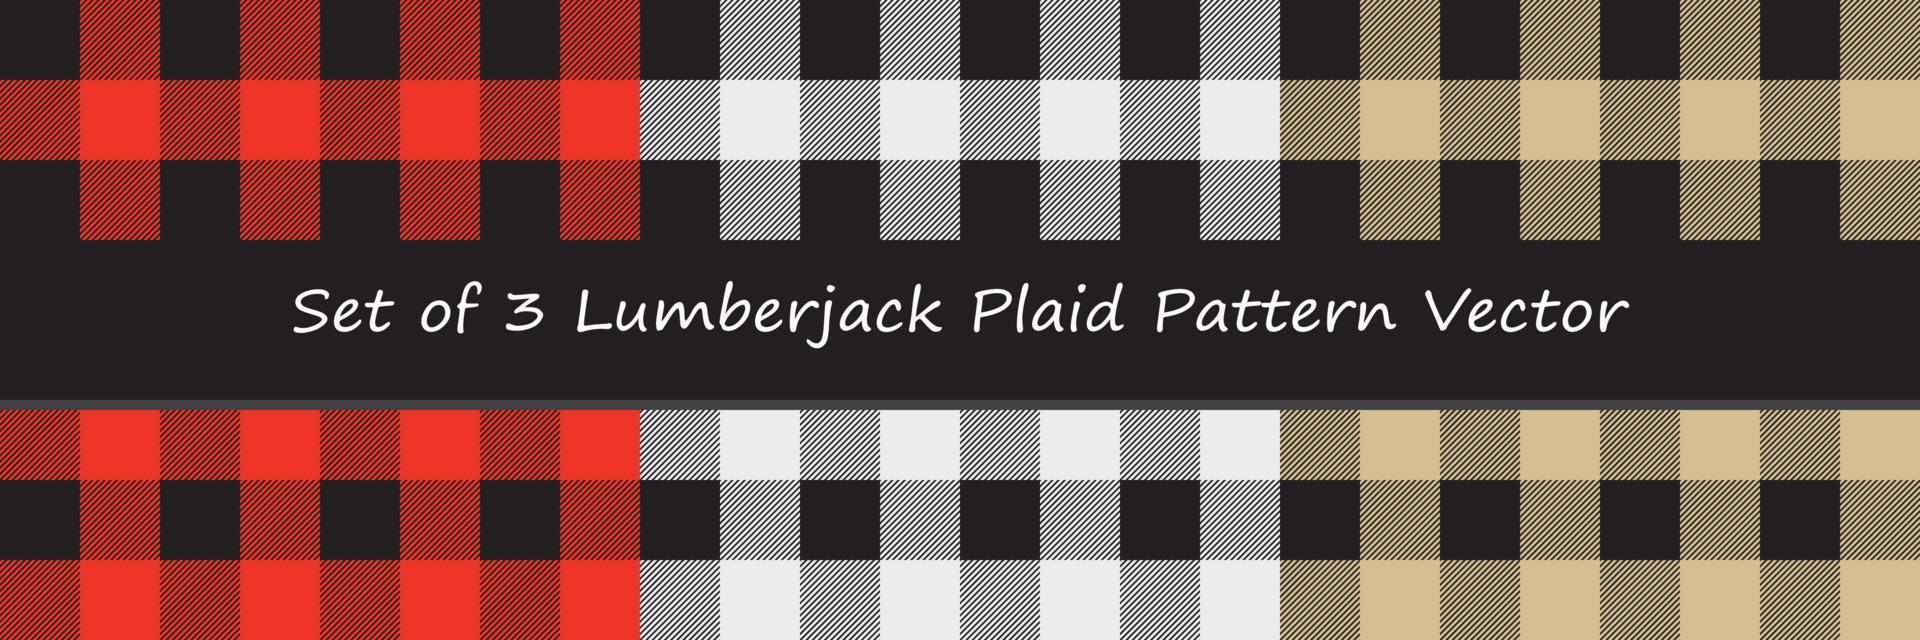 Set of 3 lumberjack plaid Seamless fabric texture background. Simple vintage textile design. collection includes 3 designs for fashion textiles, decorative Paper, fabric, House Interior and etc. vector